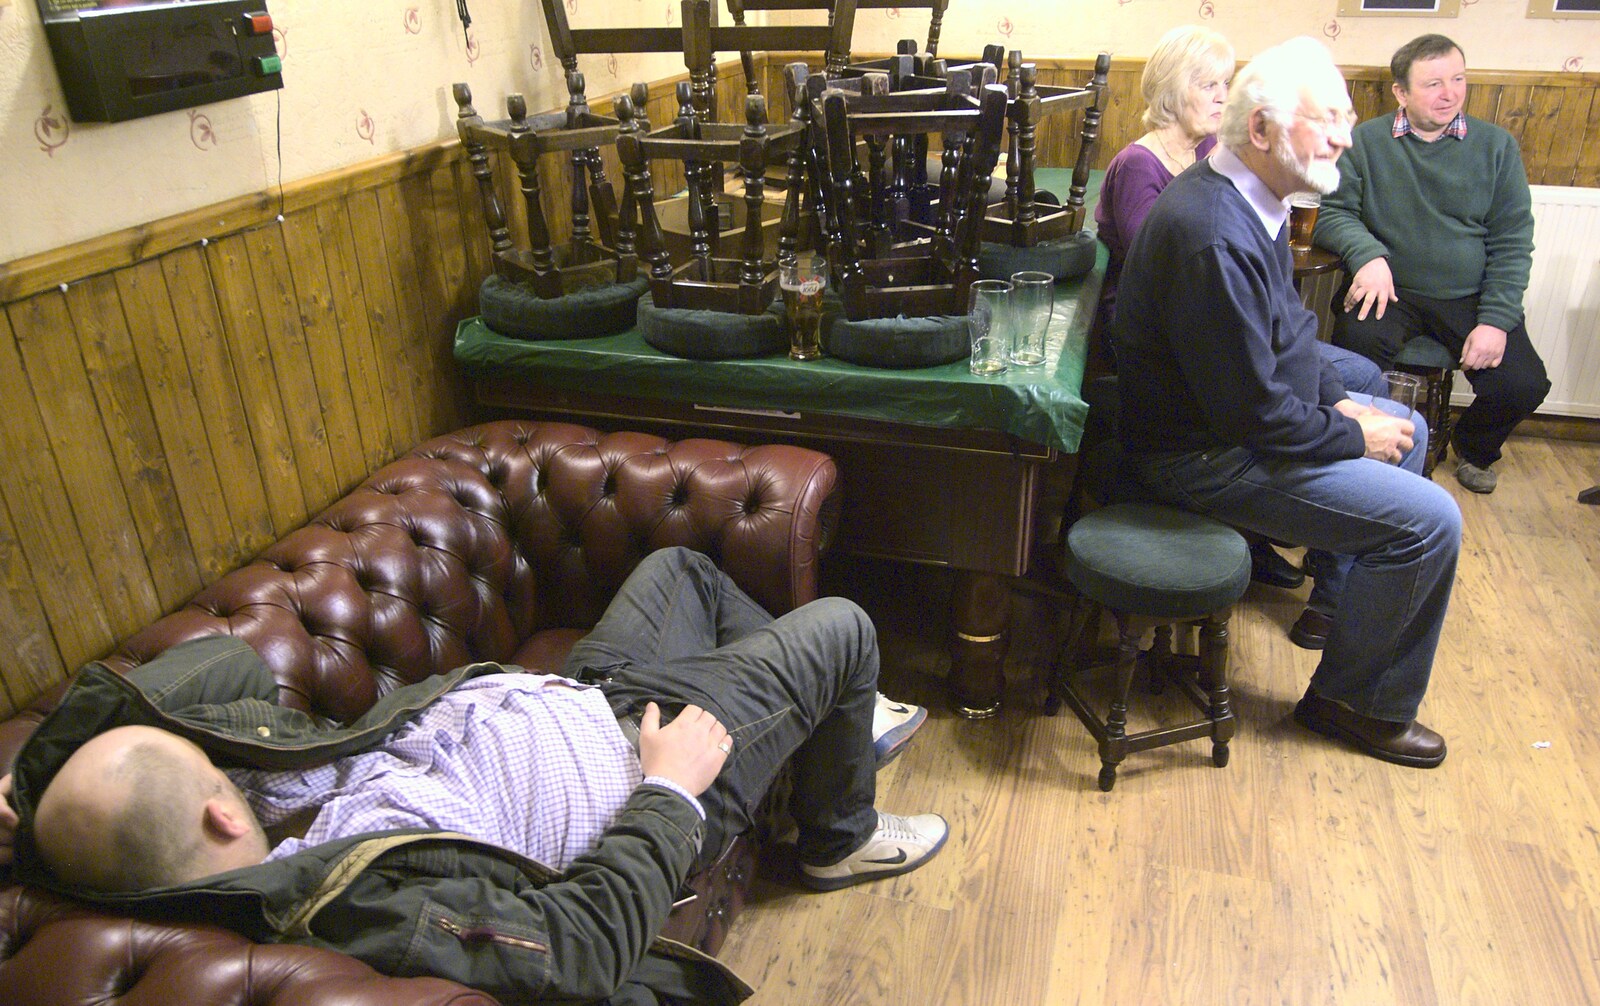 The sofa dude is still asleep from The Cherry Tree Beer Festival, Yaxley, Suffolk - 4th February 2011